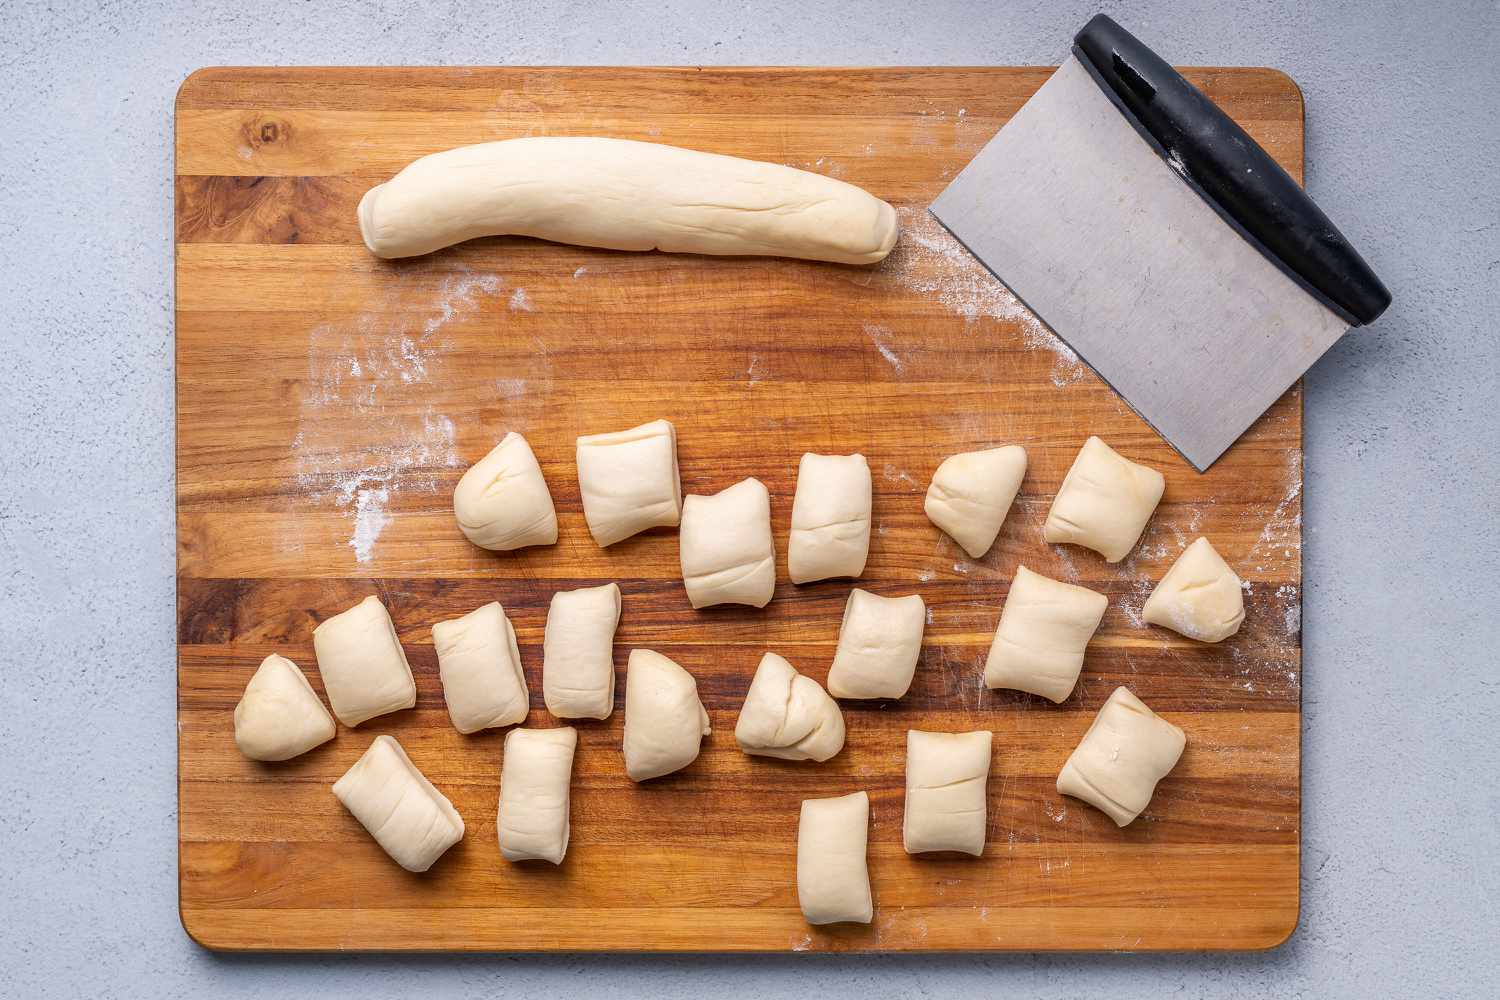 A roll of dough cut into 1 inch pieces on a cutting board